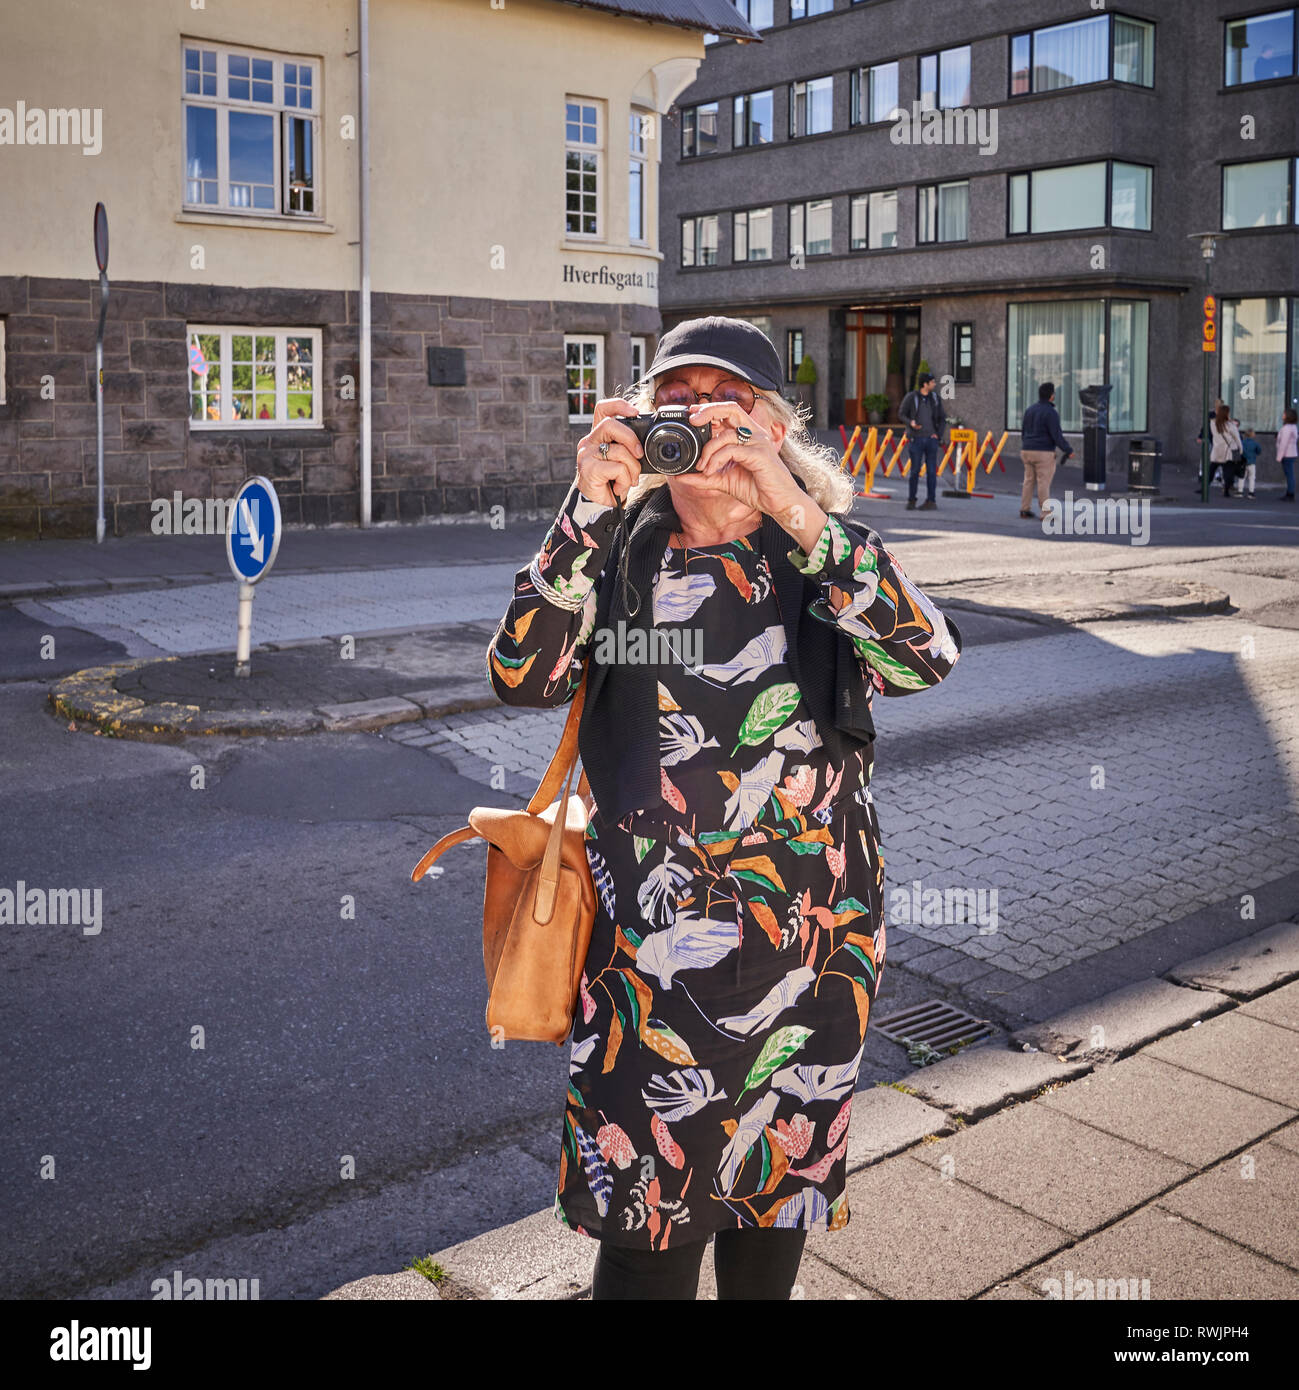 Woman taking a picture, Reykjavik, Iceland Stock Photo